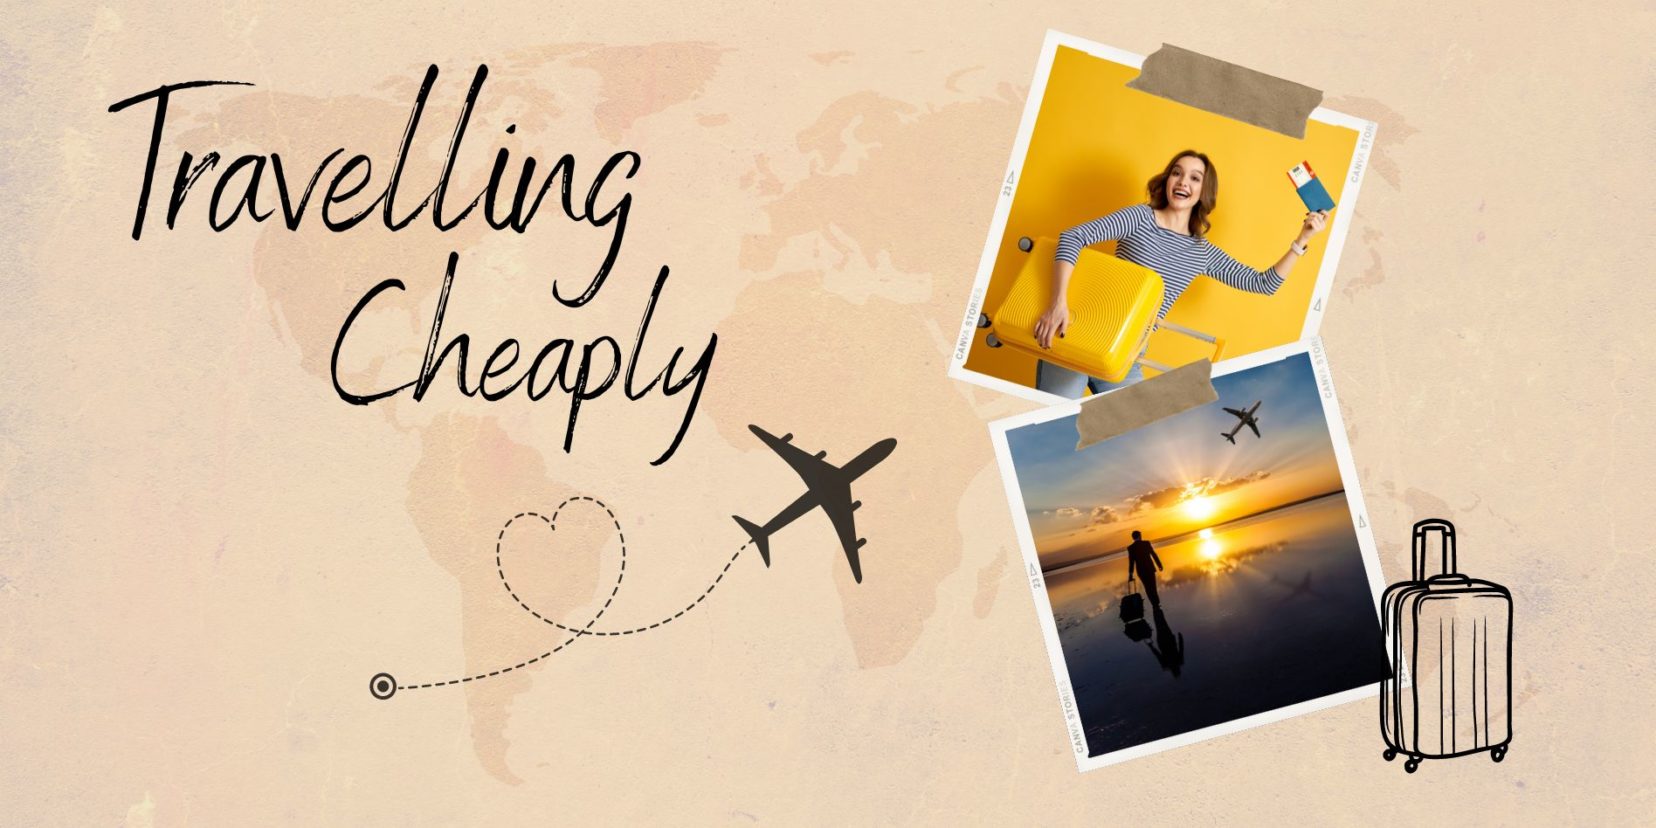 Travelling Cheaply Header